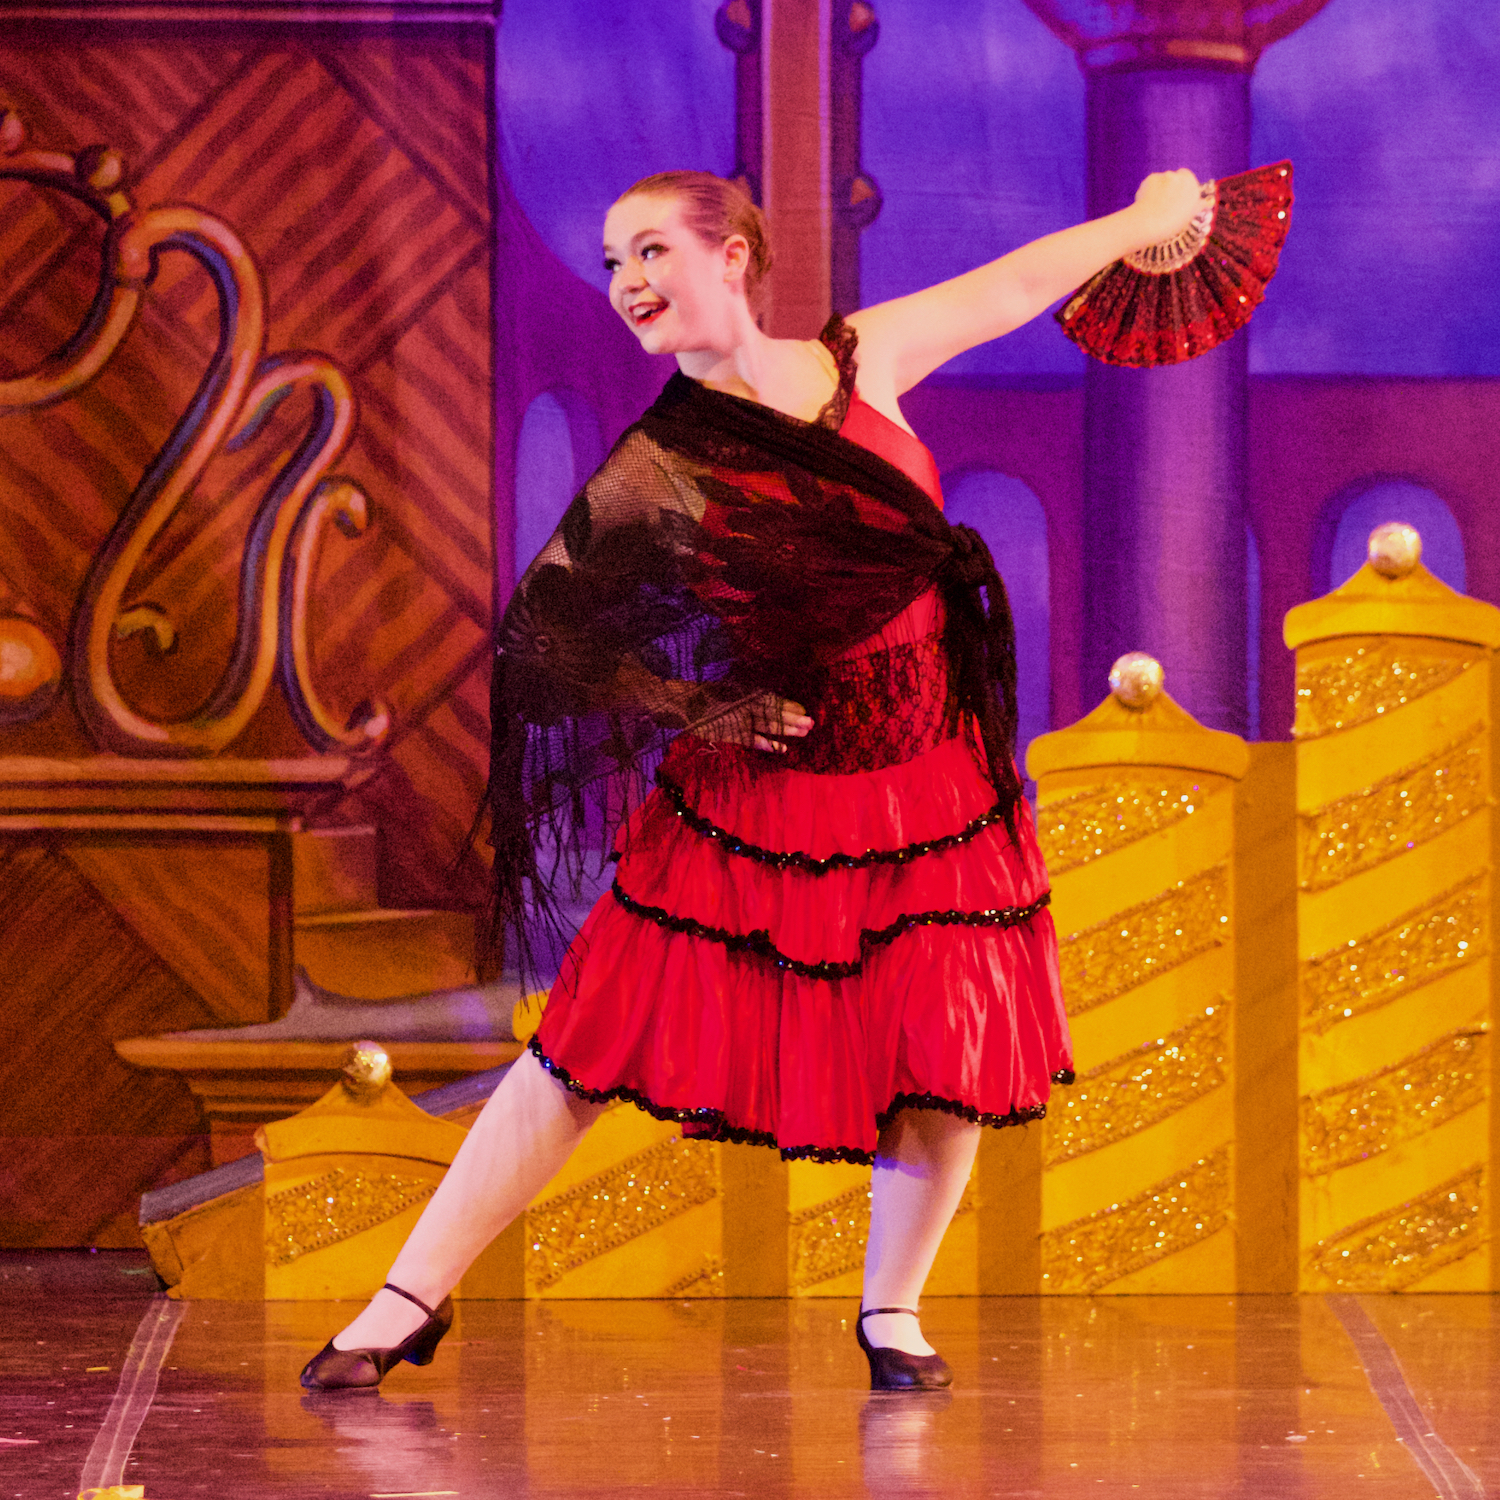 Leah performing in the Spanish dance in the Nutcracker